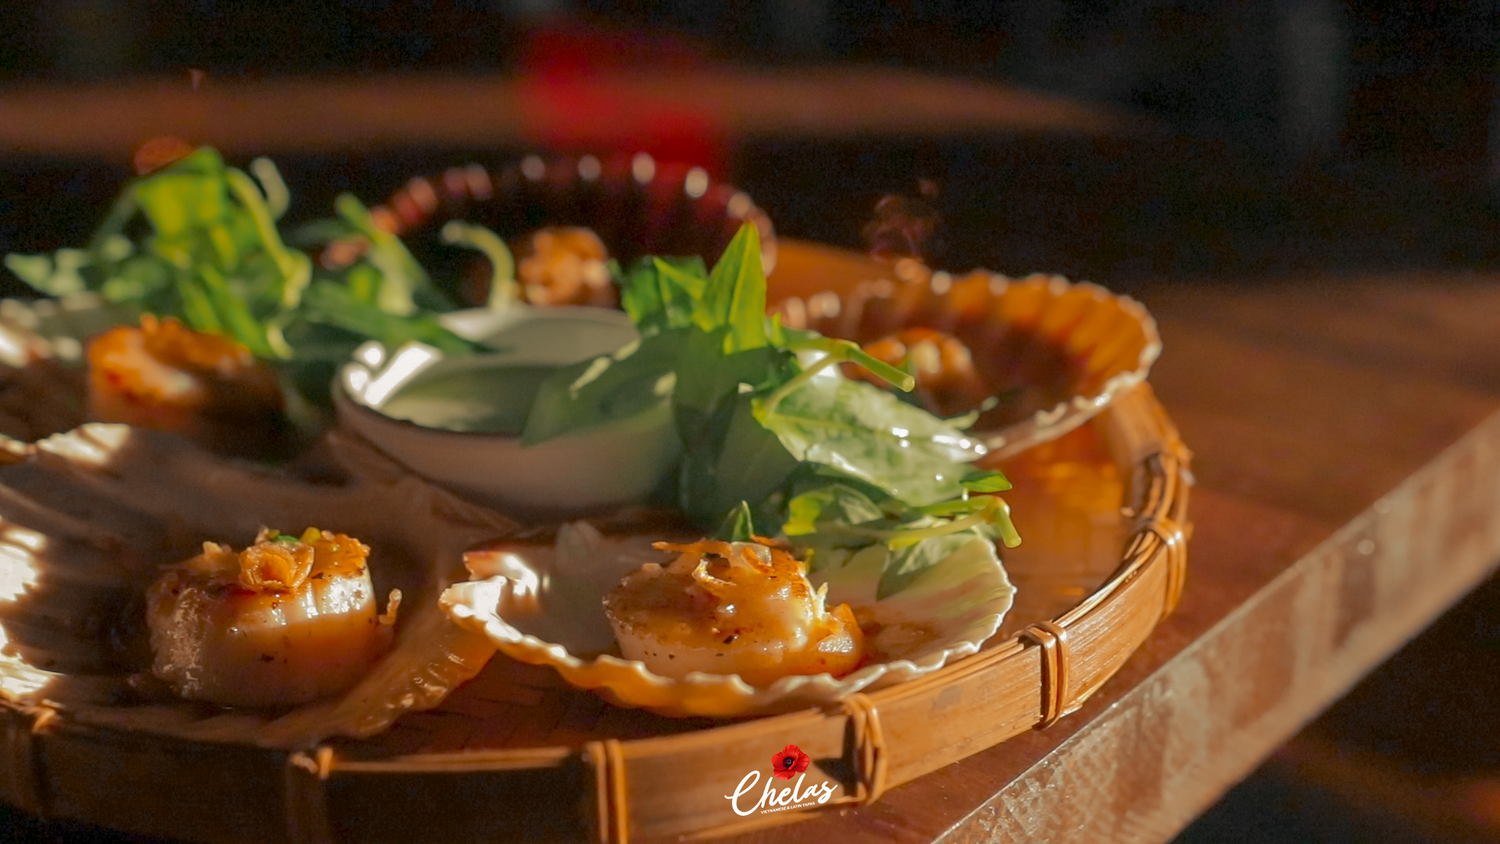 A bamboo plate with scallops served in seashells and garnished with greens. 